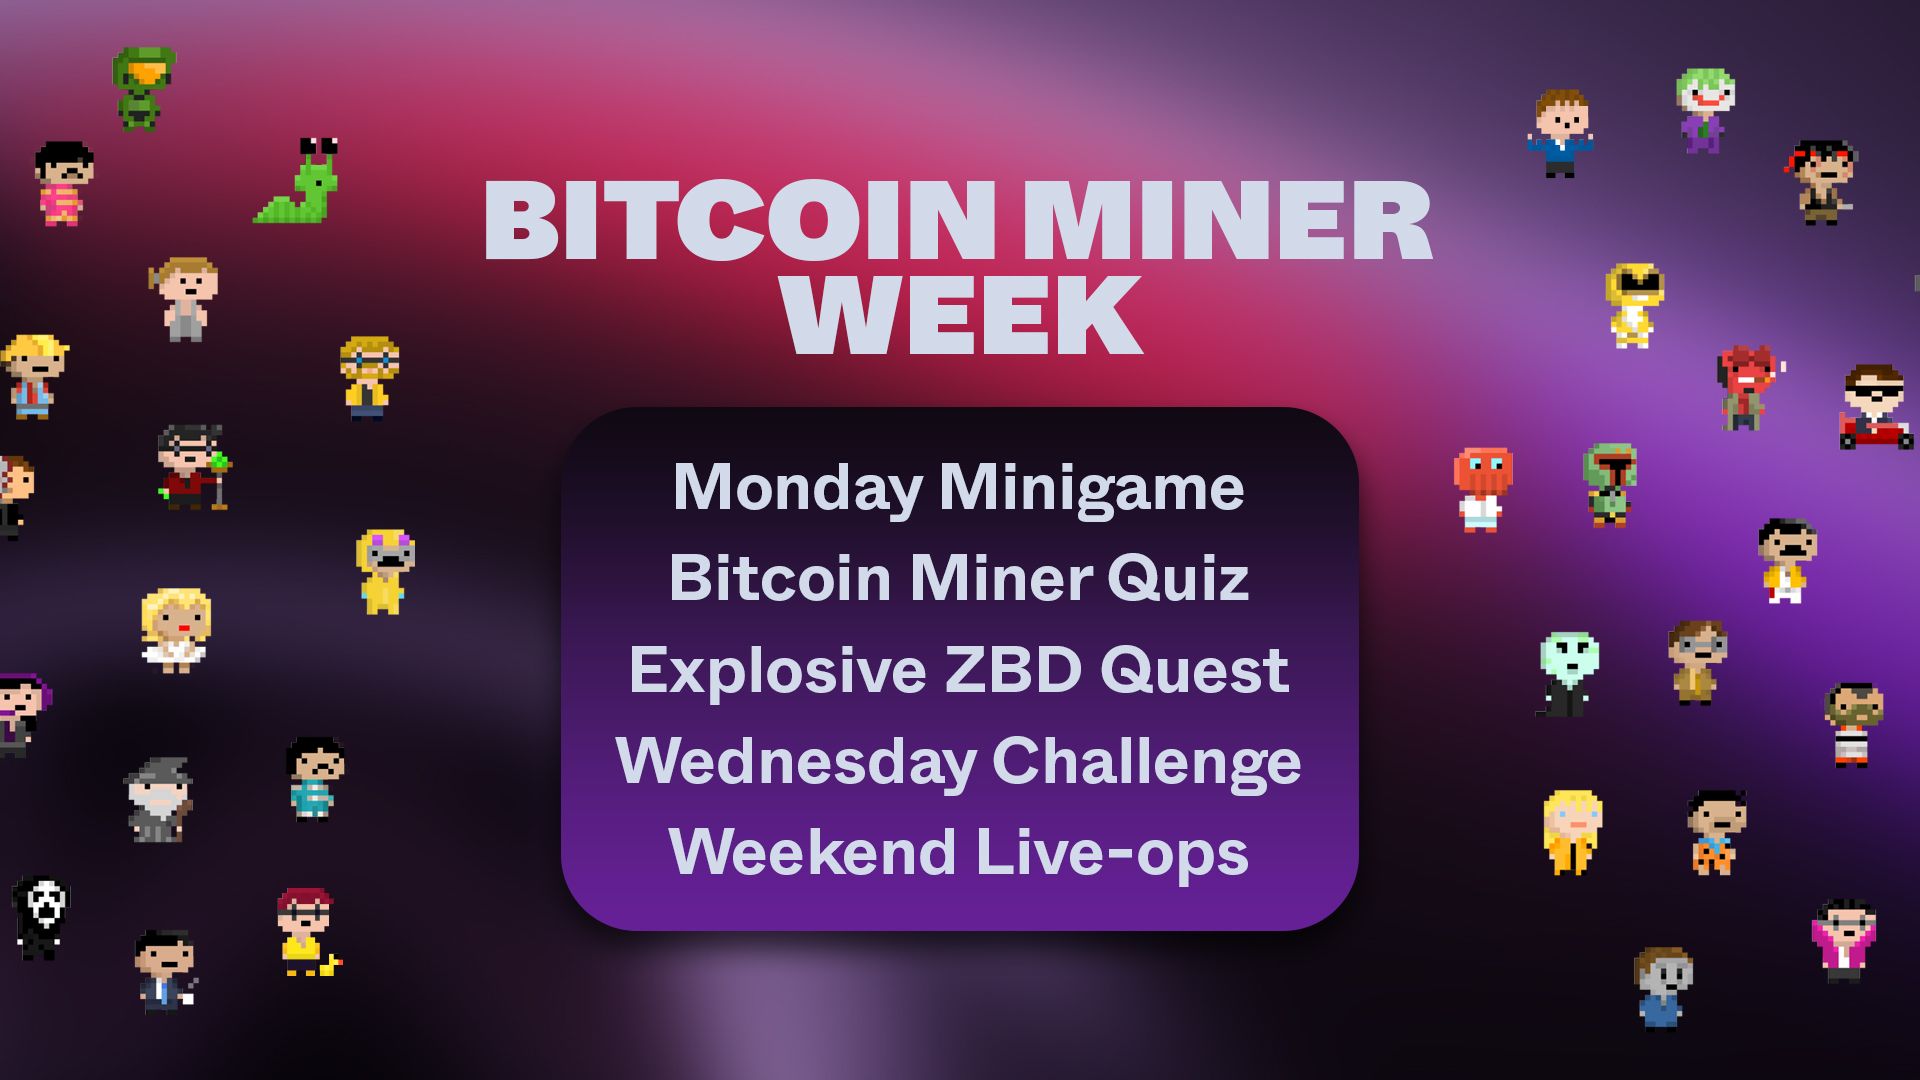 Bitcoin MIner Week – Join events and win huge prizes.